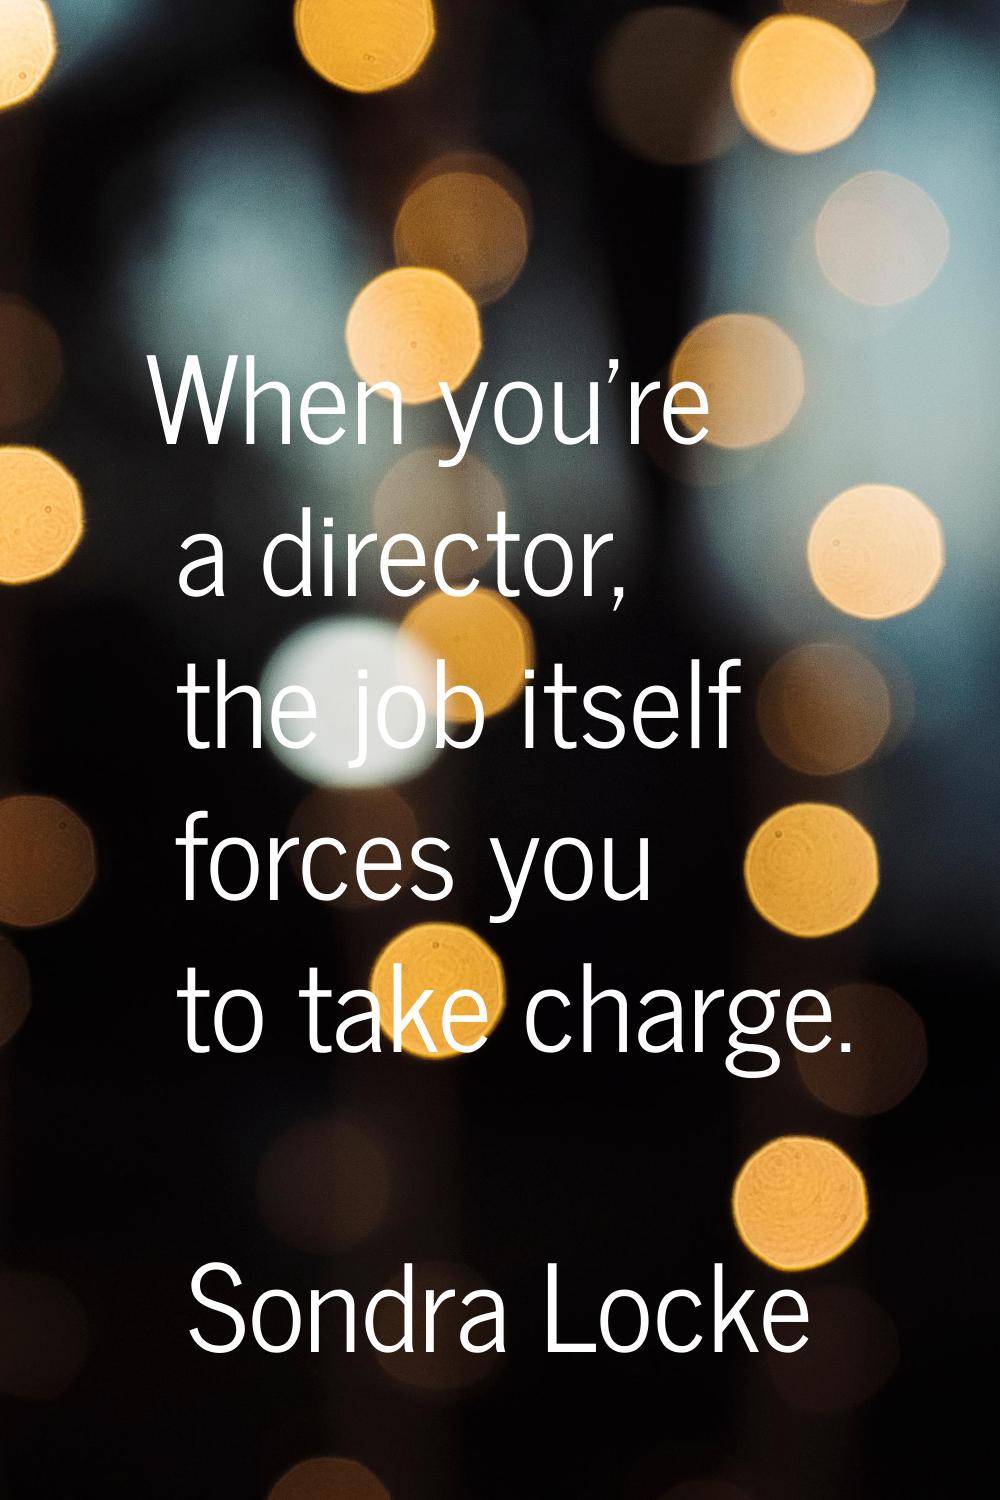 When you're a director, the job itself forces you to take charge.